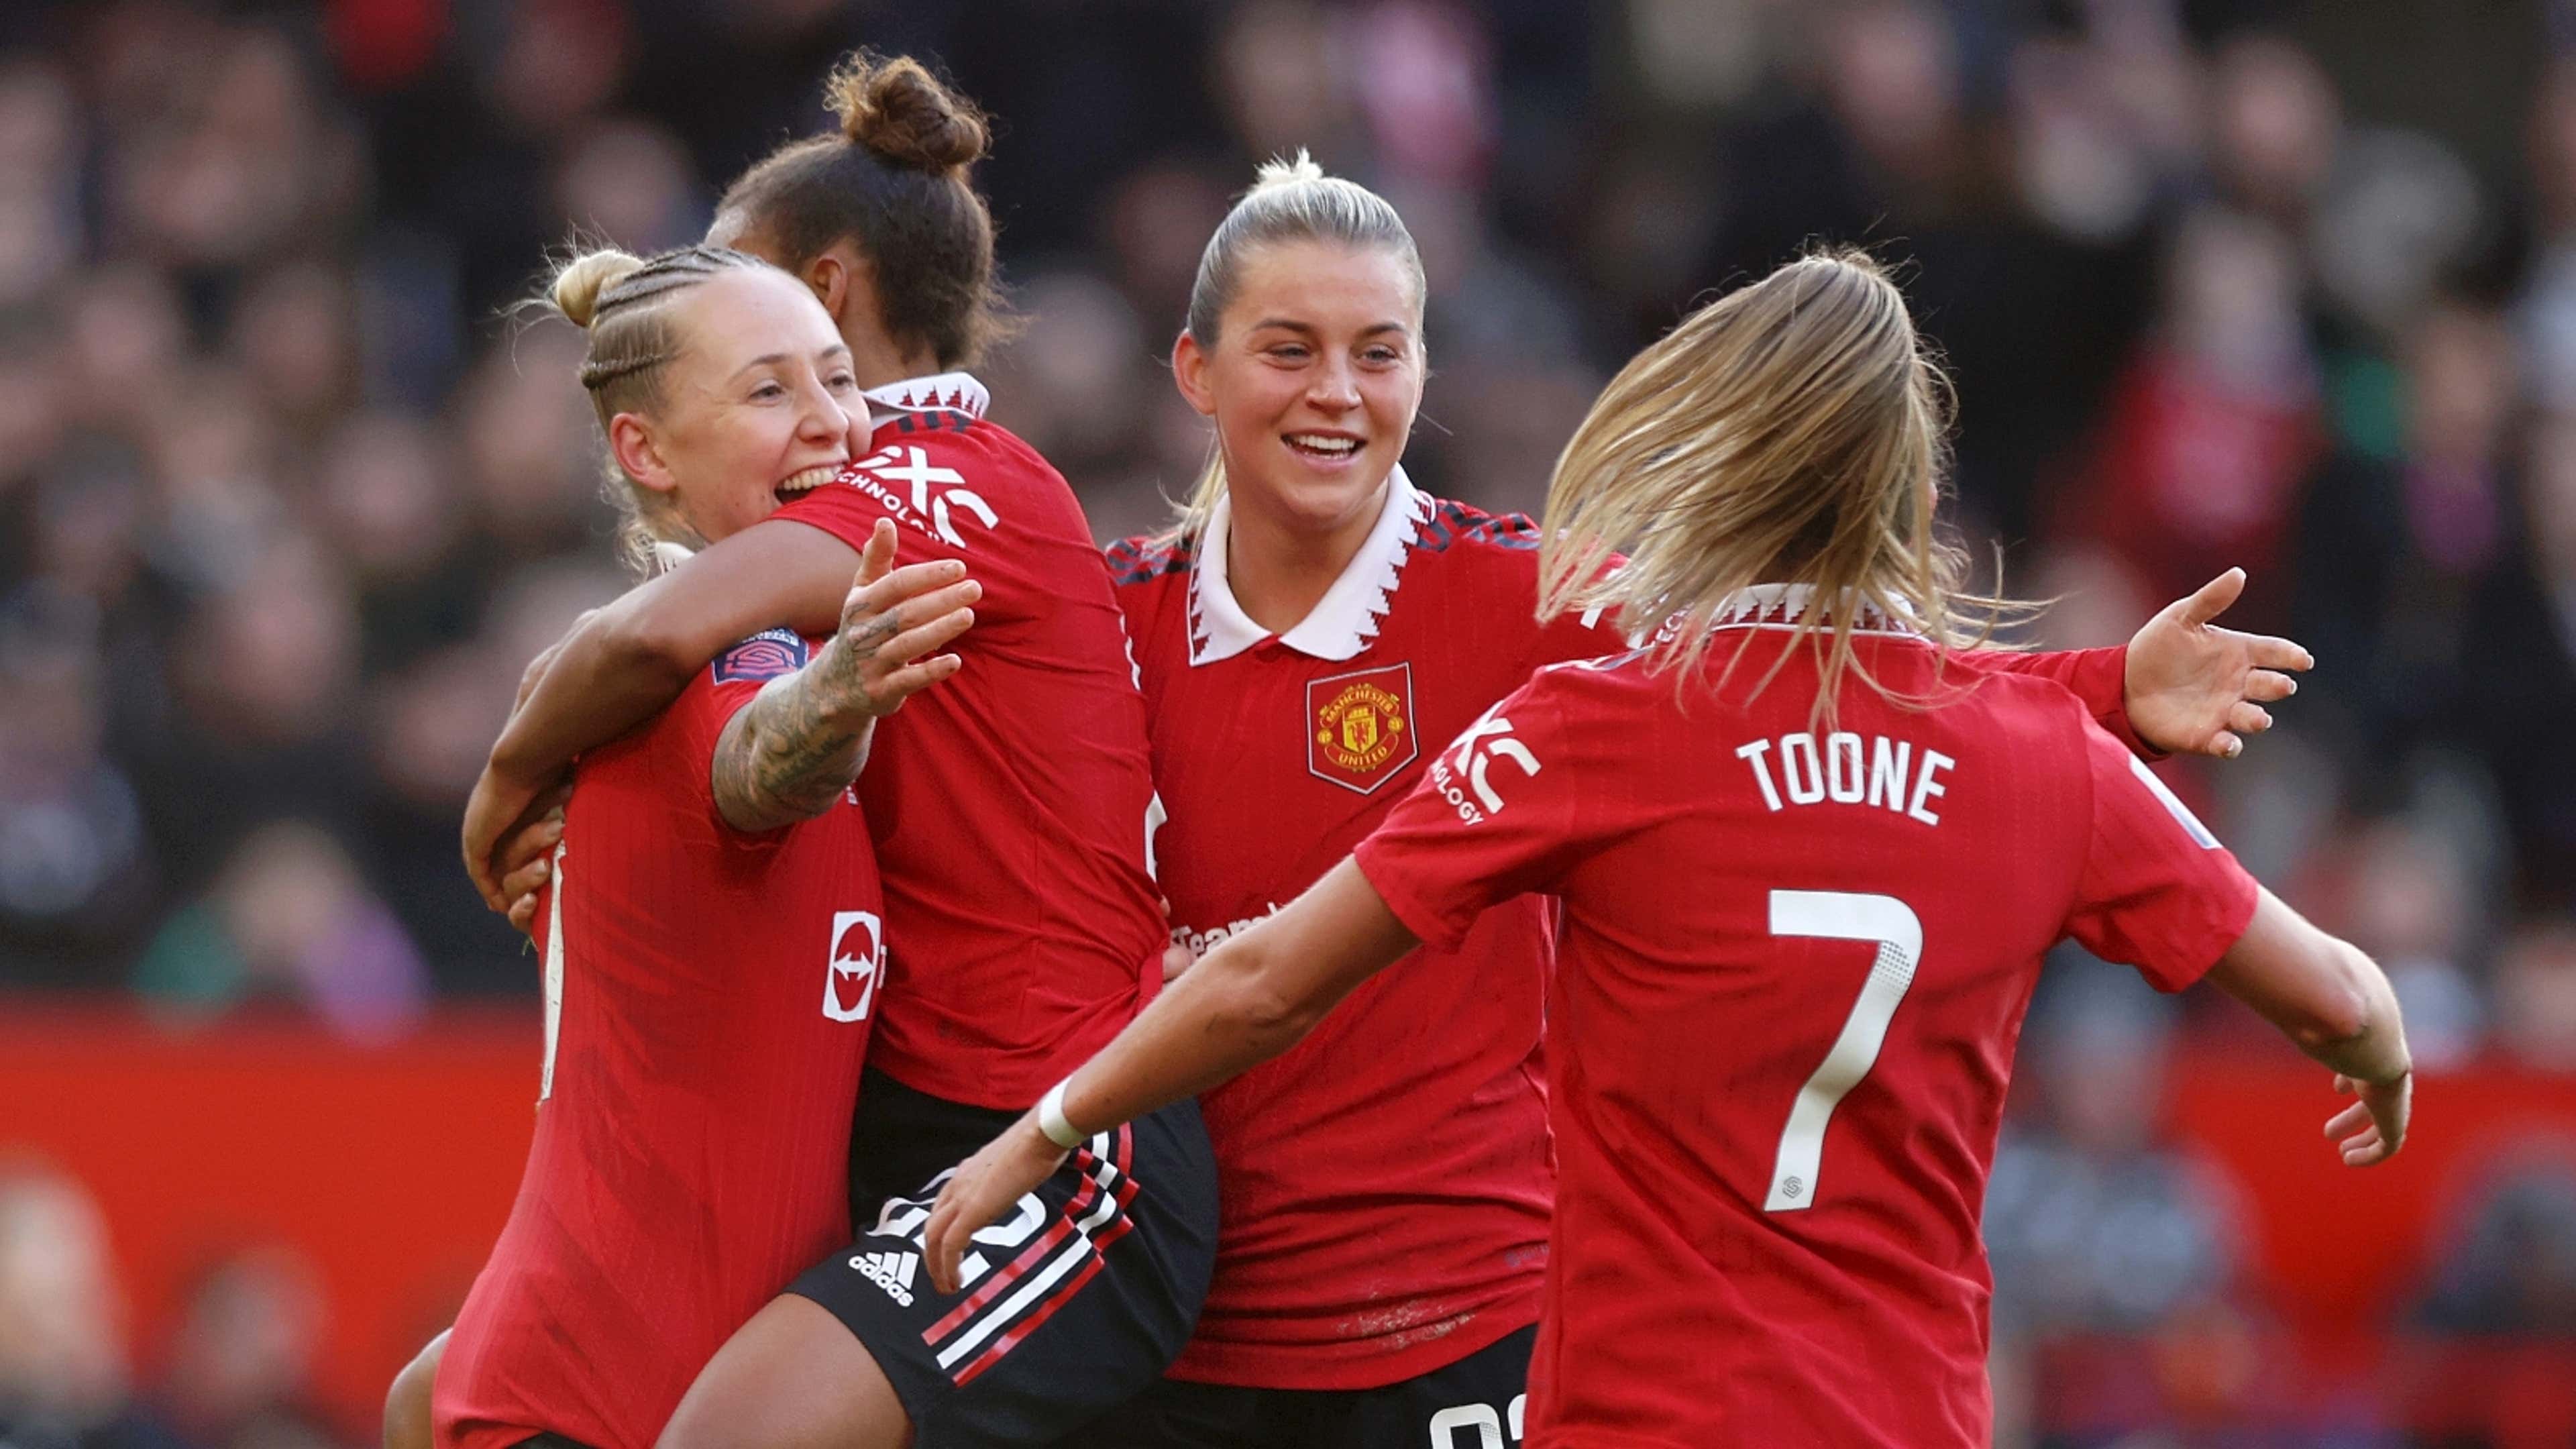 Aston Villa Women vs Manchester United Women: Where to watch the match  online, live stream, TV channels & kick-off time